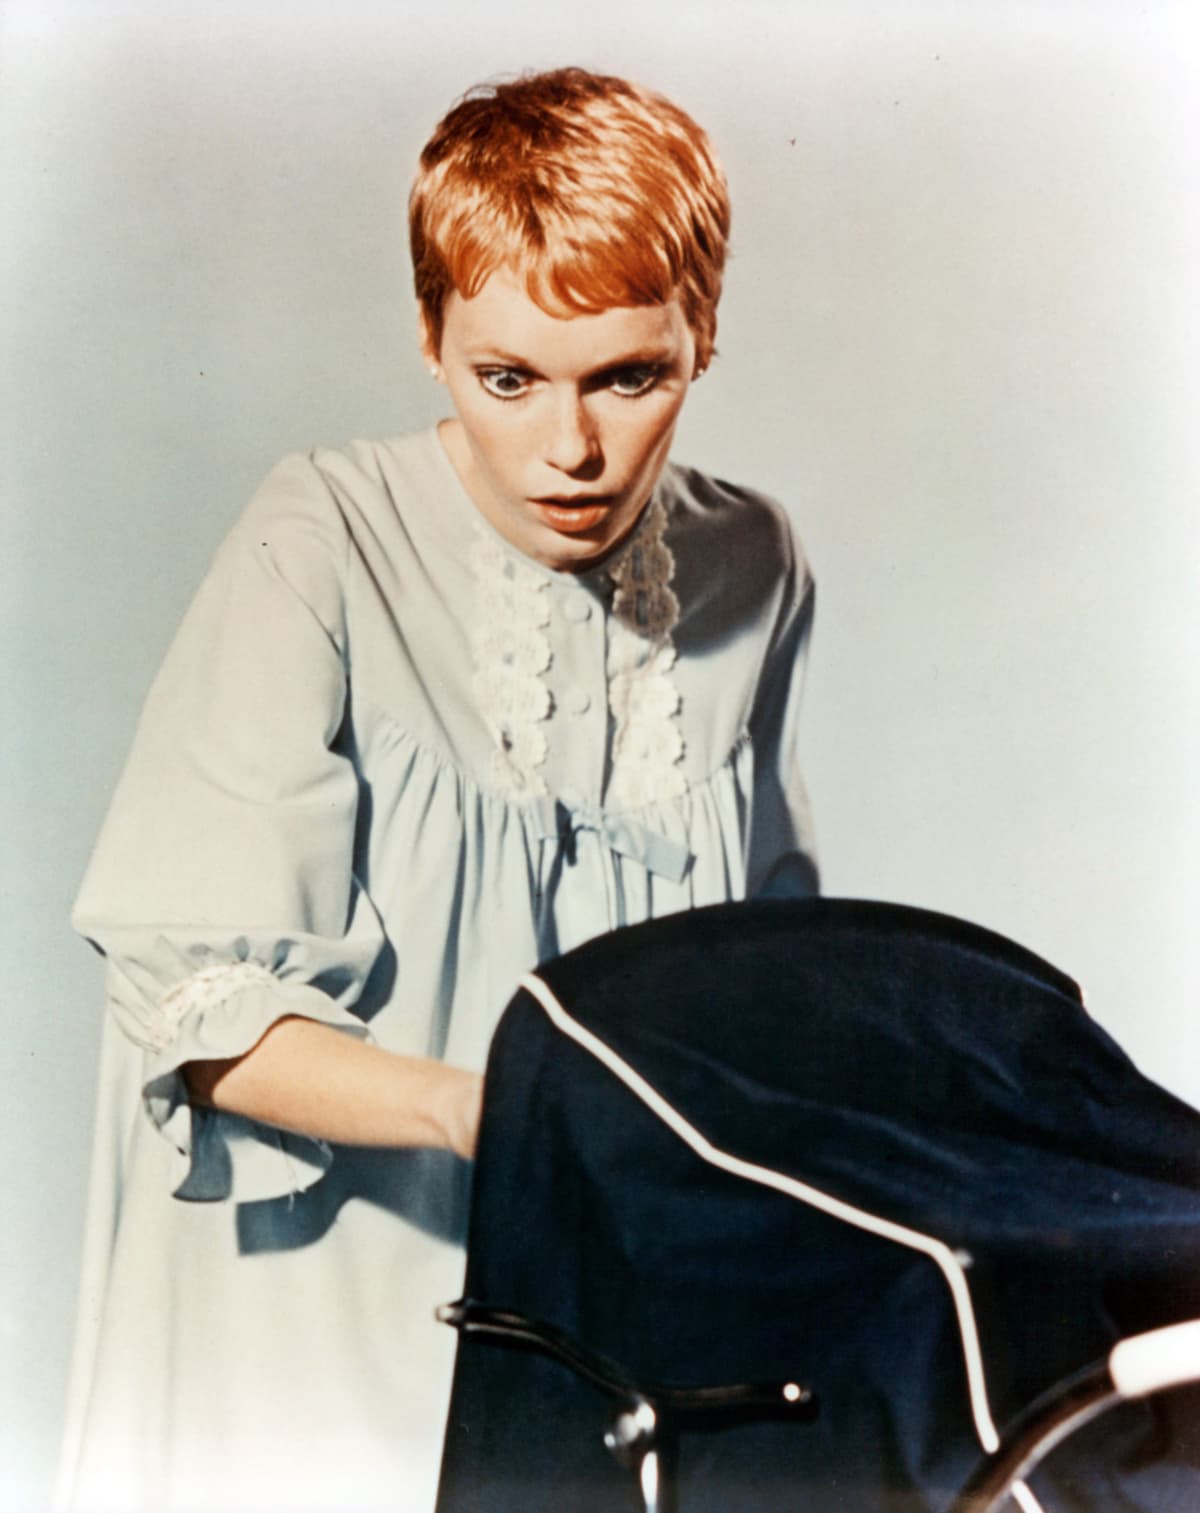 A poster for Roman Polanski's 1968 drama 'Rosemary's Baby' starring Mia Farrow. (Photo by Movie Poster Image Art/Getty Images)